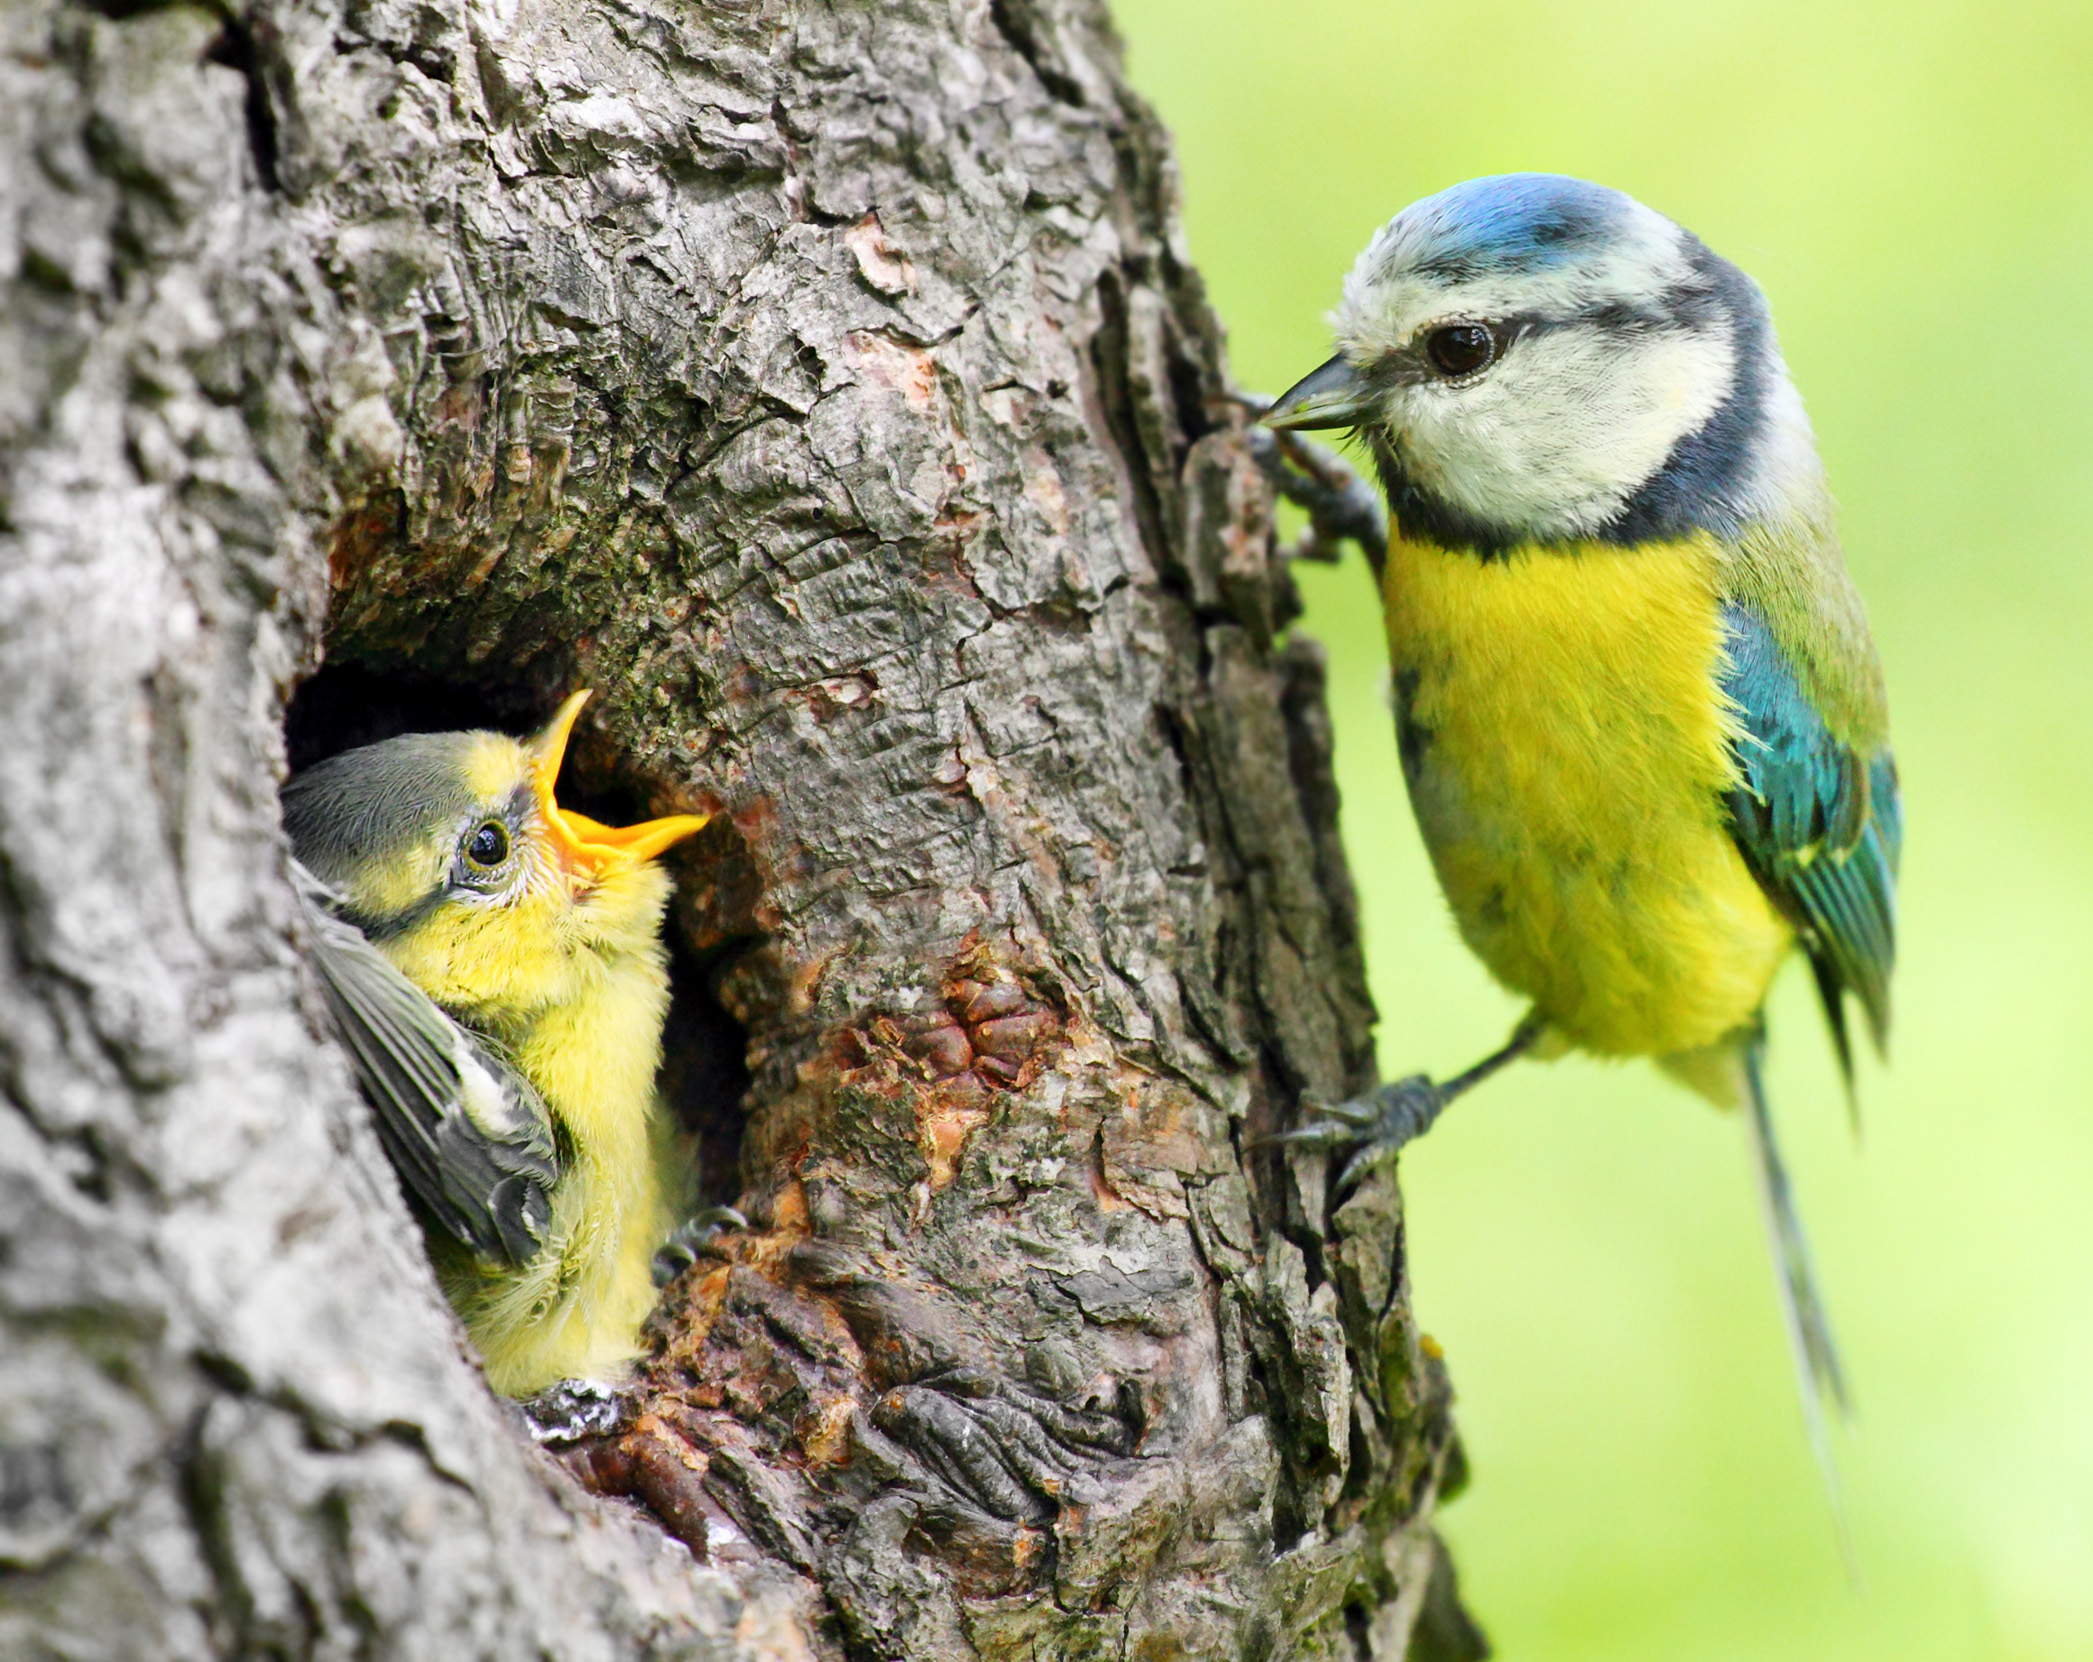 An adult Blue Tit feeding it's chick in their nest located in the hole of a tree.